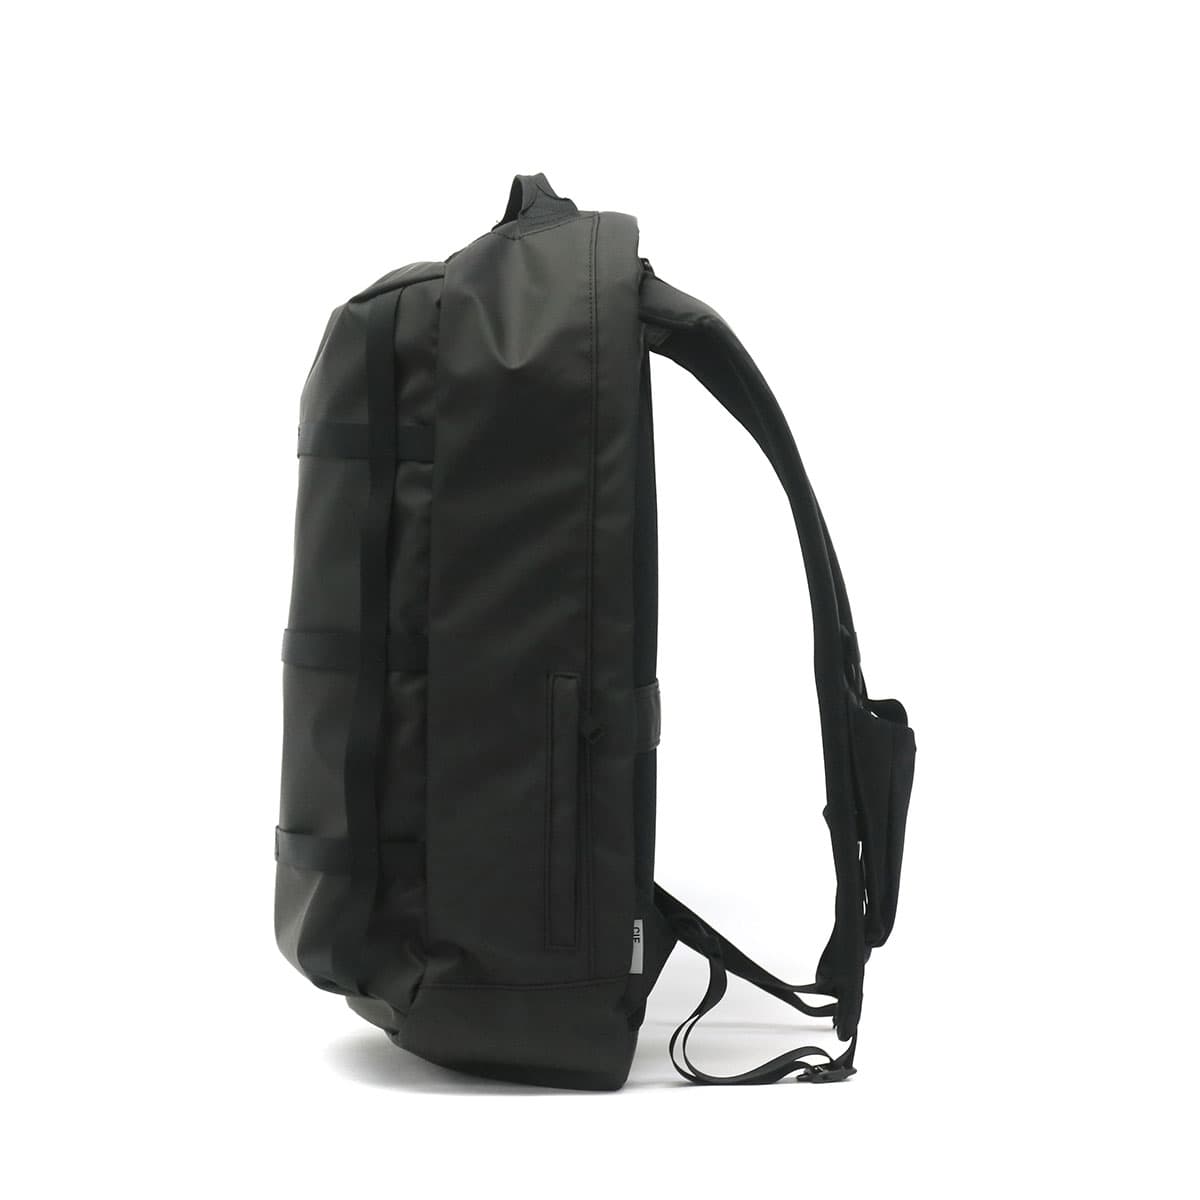 CIE シー GRID3 2WAY BACKPACK-02 2WAYバックパック 032059｜【正規